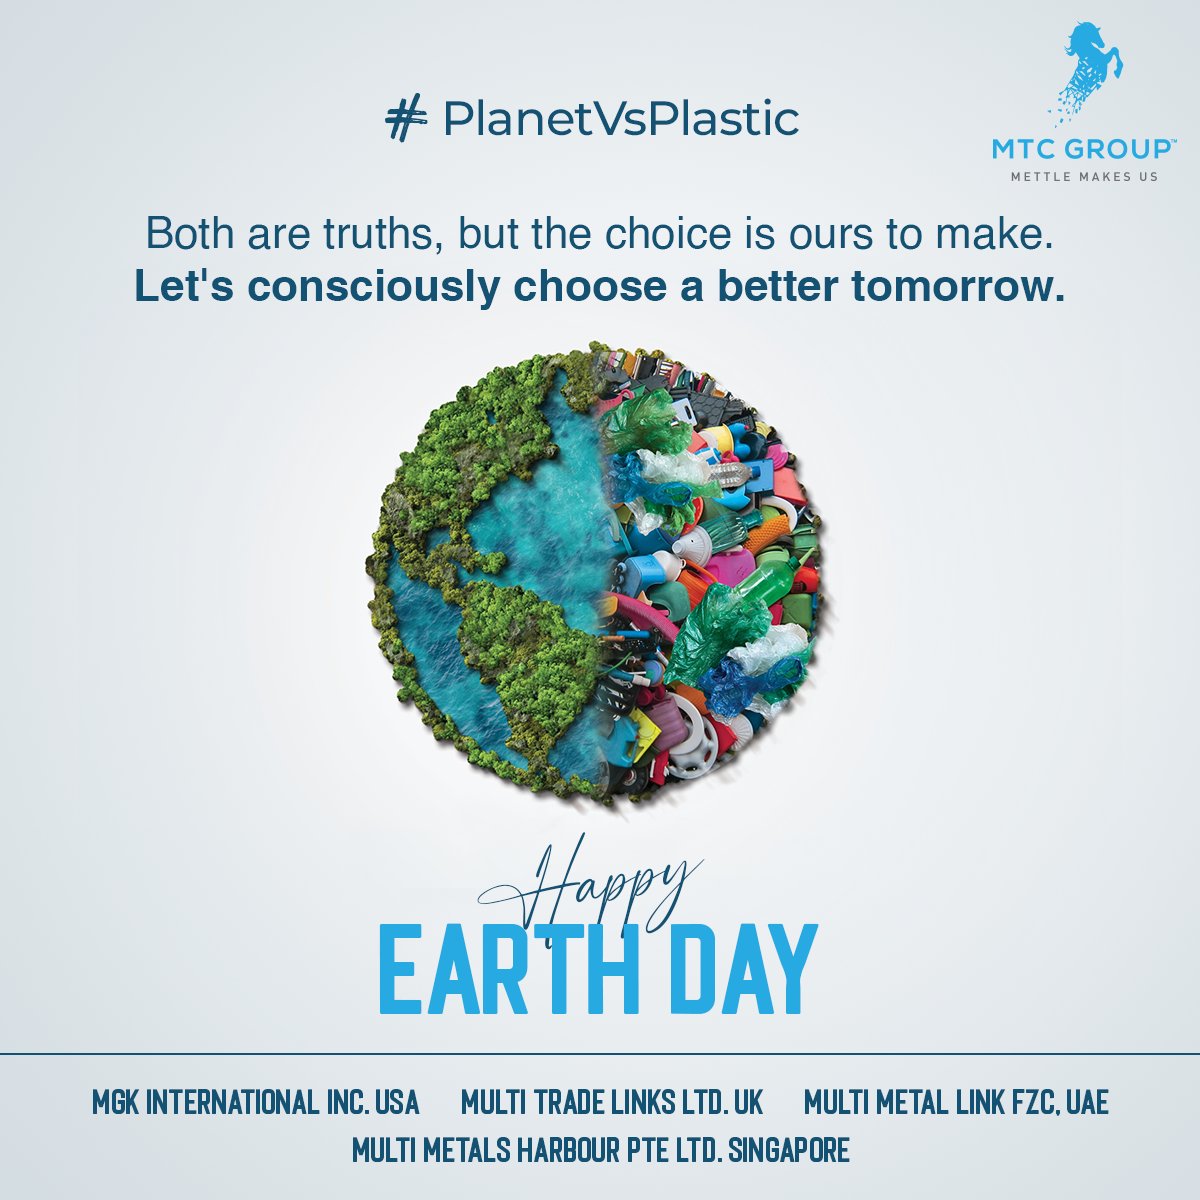 This Earth Day, let's be the change we wish to see.

Happy Earth Day!

#EarthDay2024 #PlanetVsPlastic #SustainableLiving #SaveMotherEarth #GreenFuture #BeTheChange #EarthDay